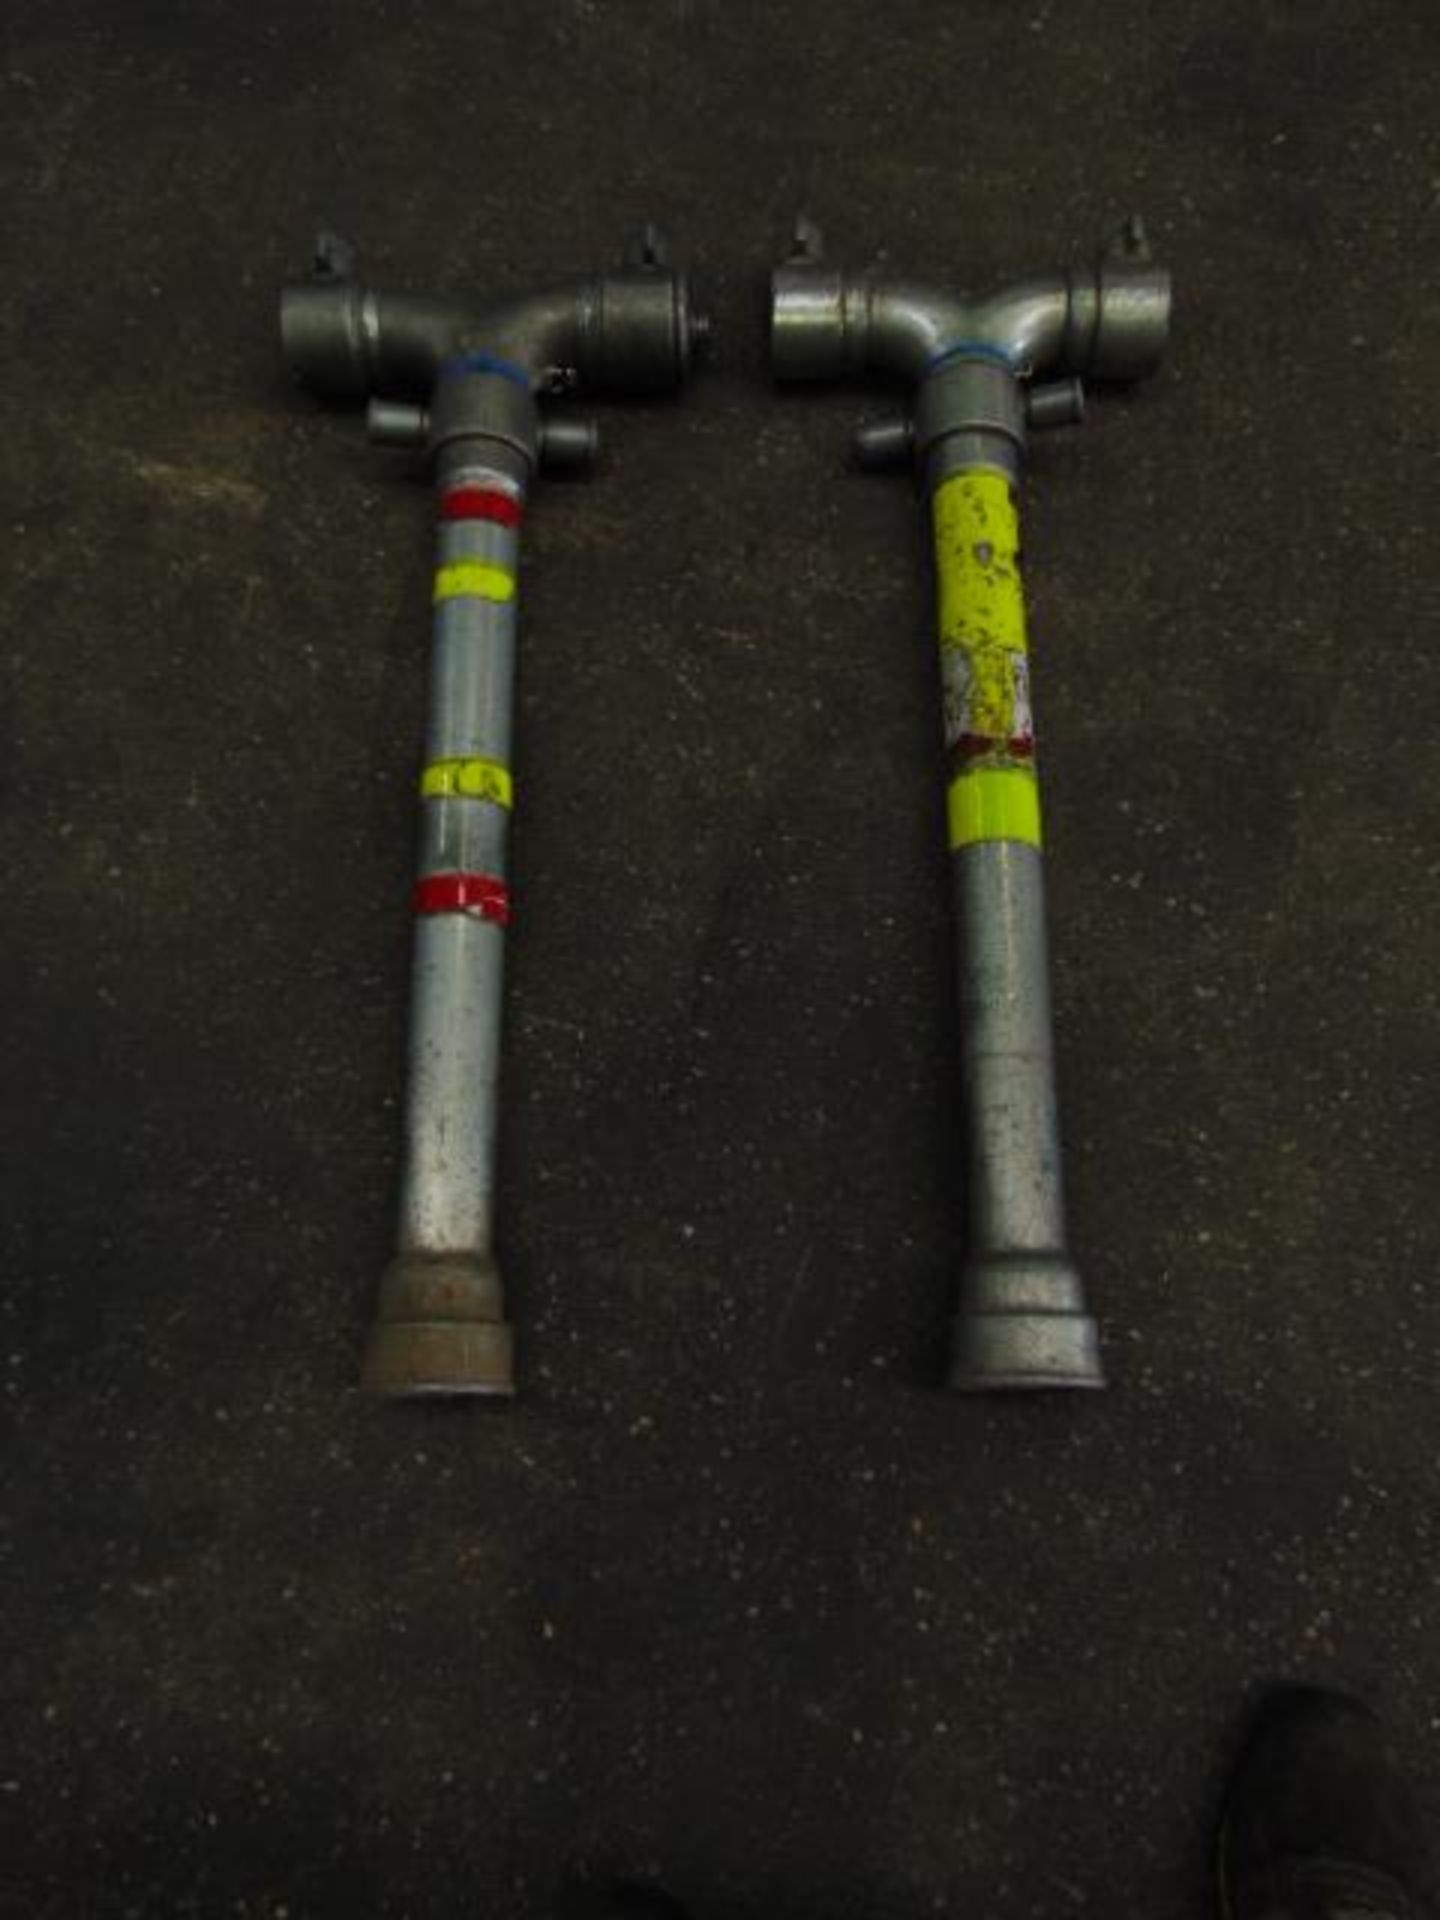 2 x Double Headed Standpipes